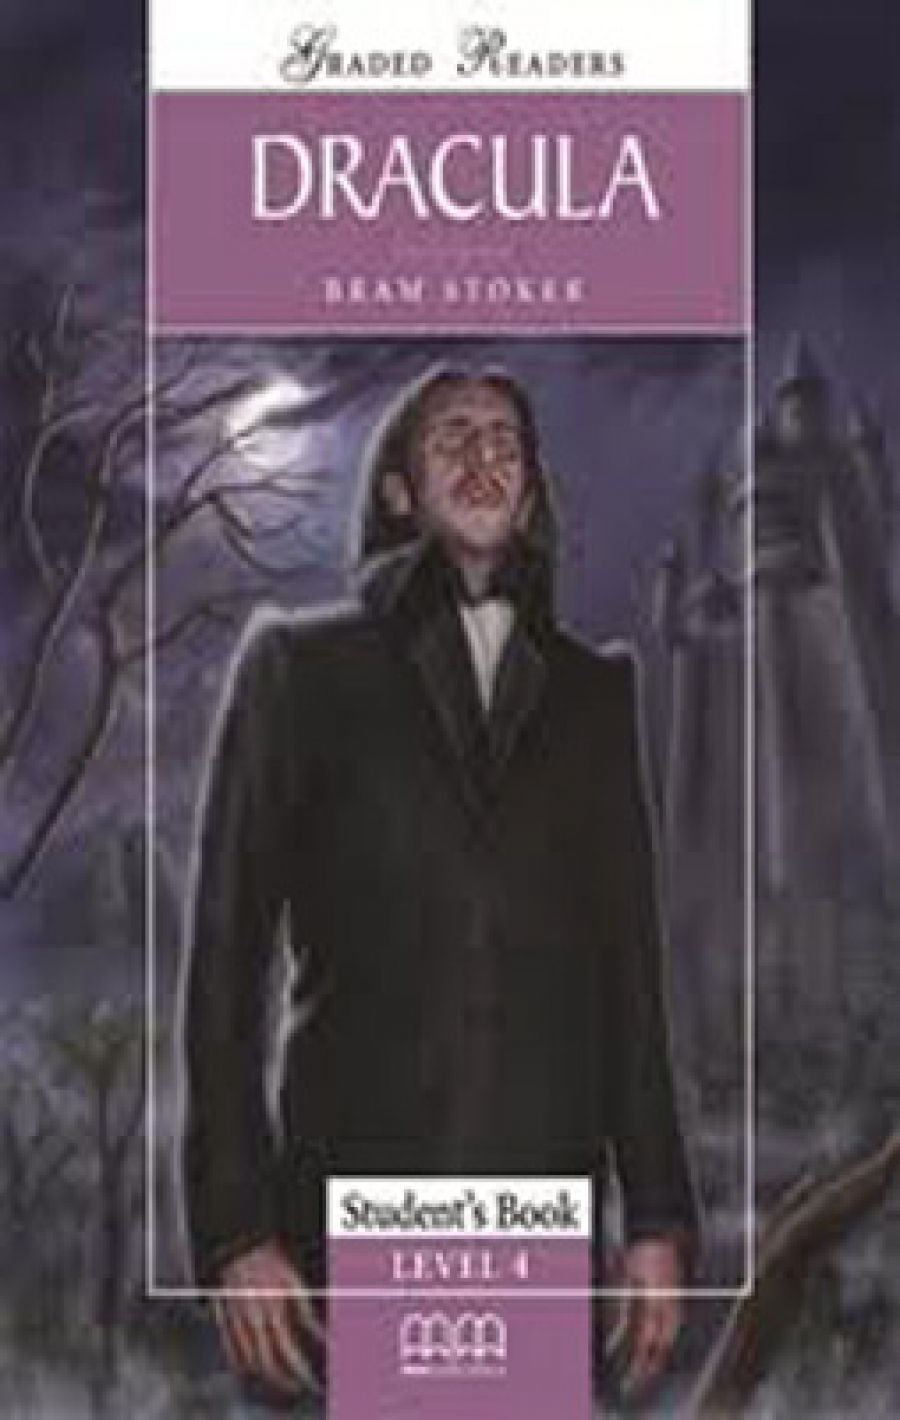 Graded Readers Level 4 Dracula Pack (Students Book, Activity Book, CD) 